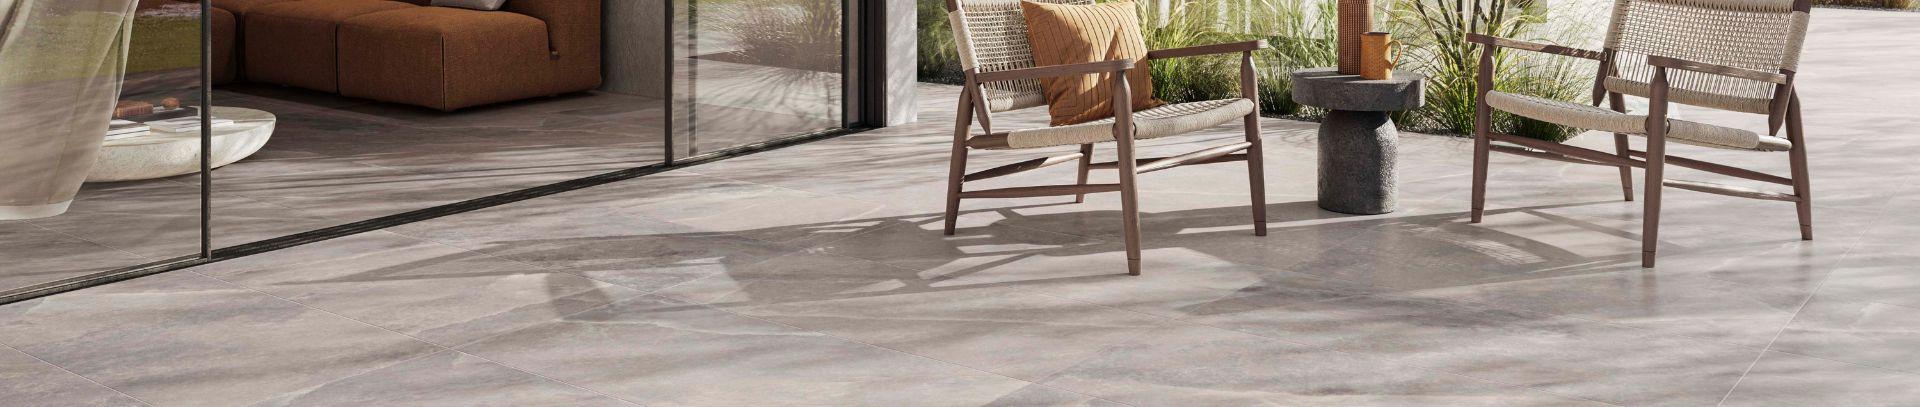 How to choose stoneware tiles for outdoors | Casalgrande Padana